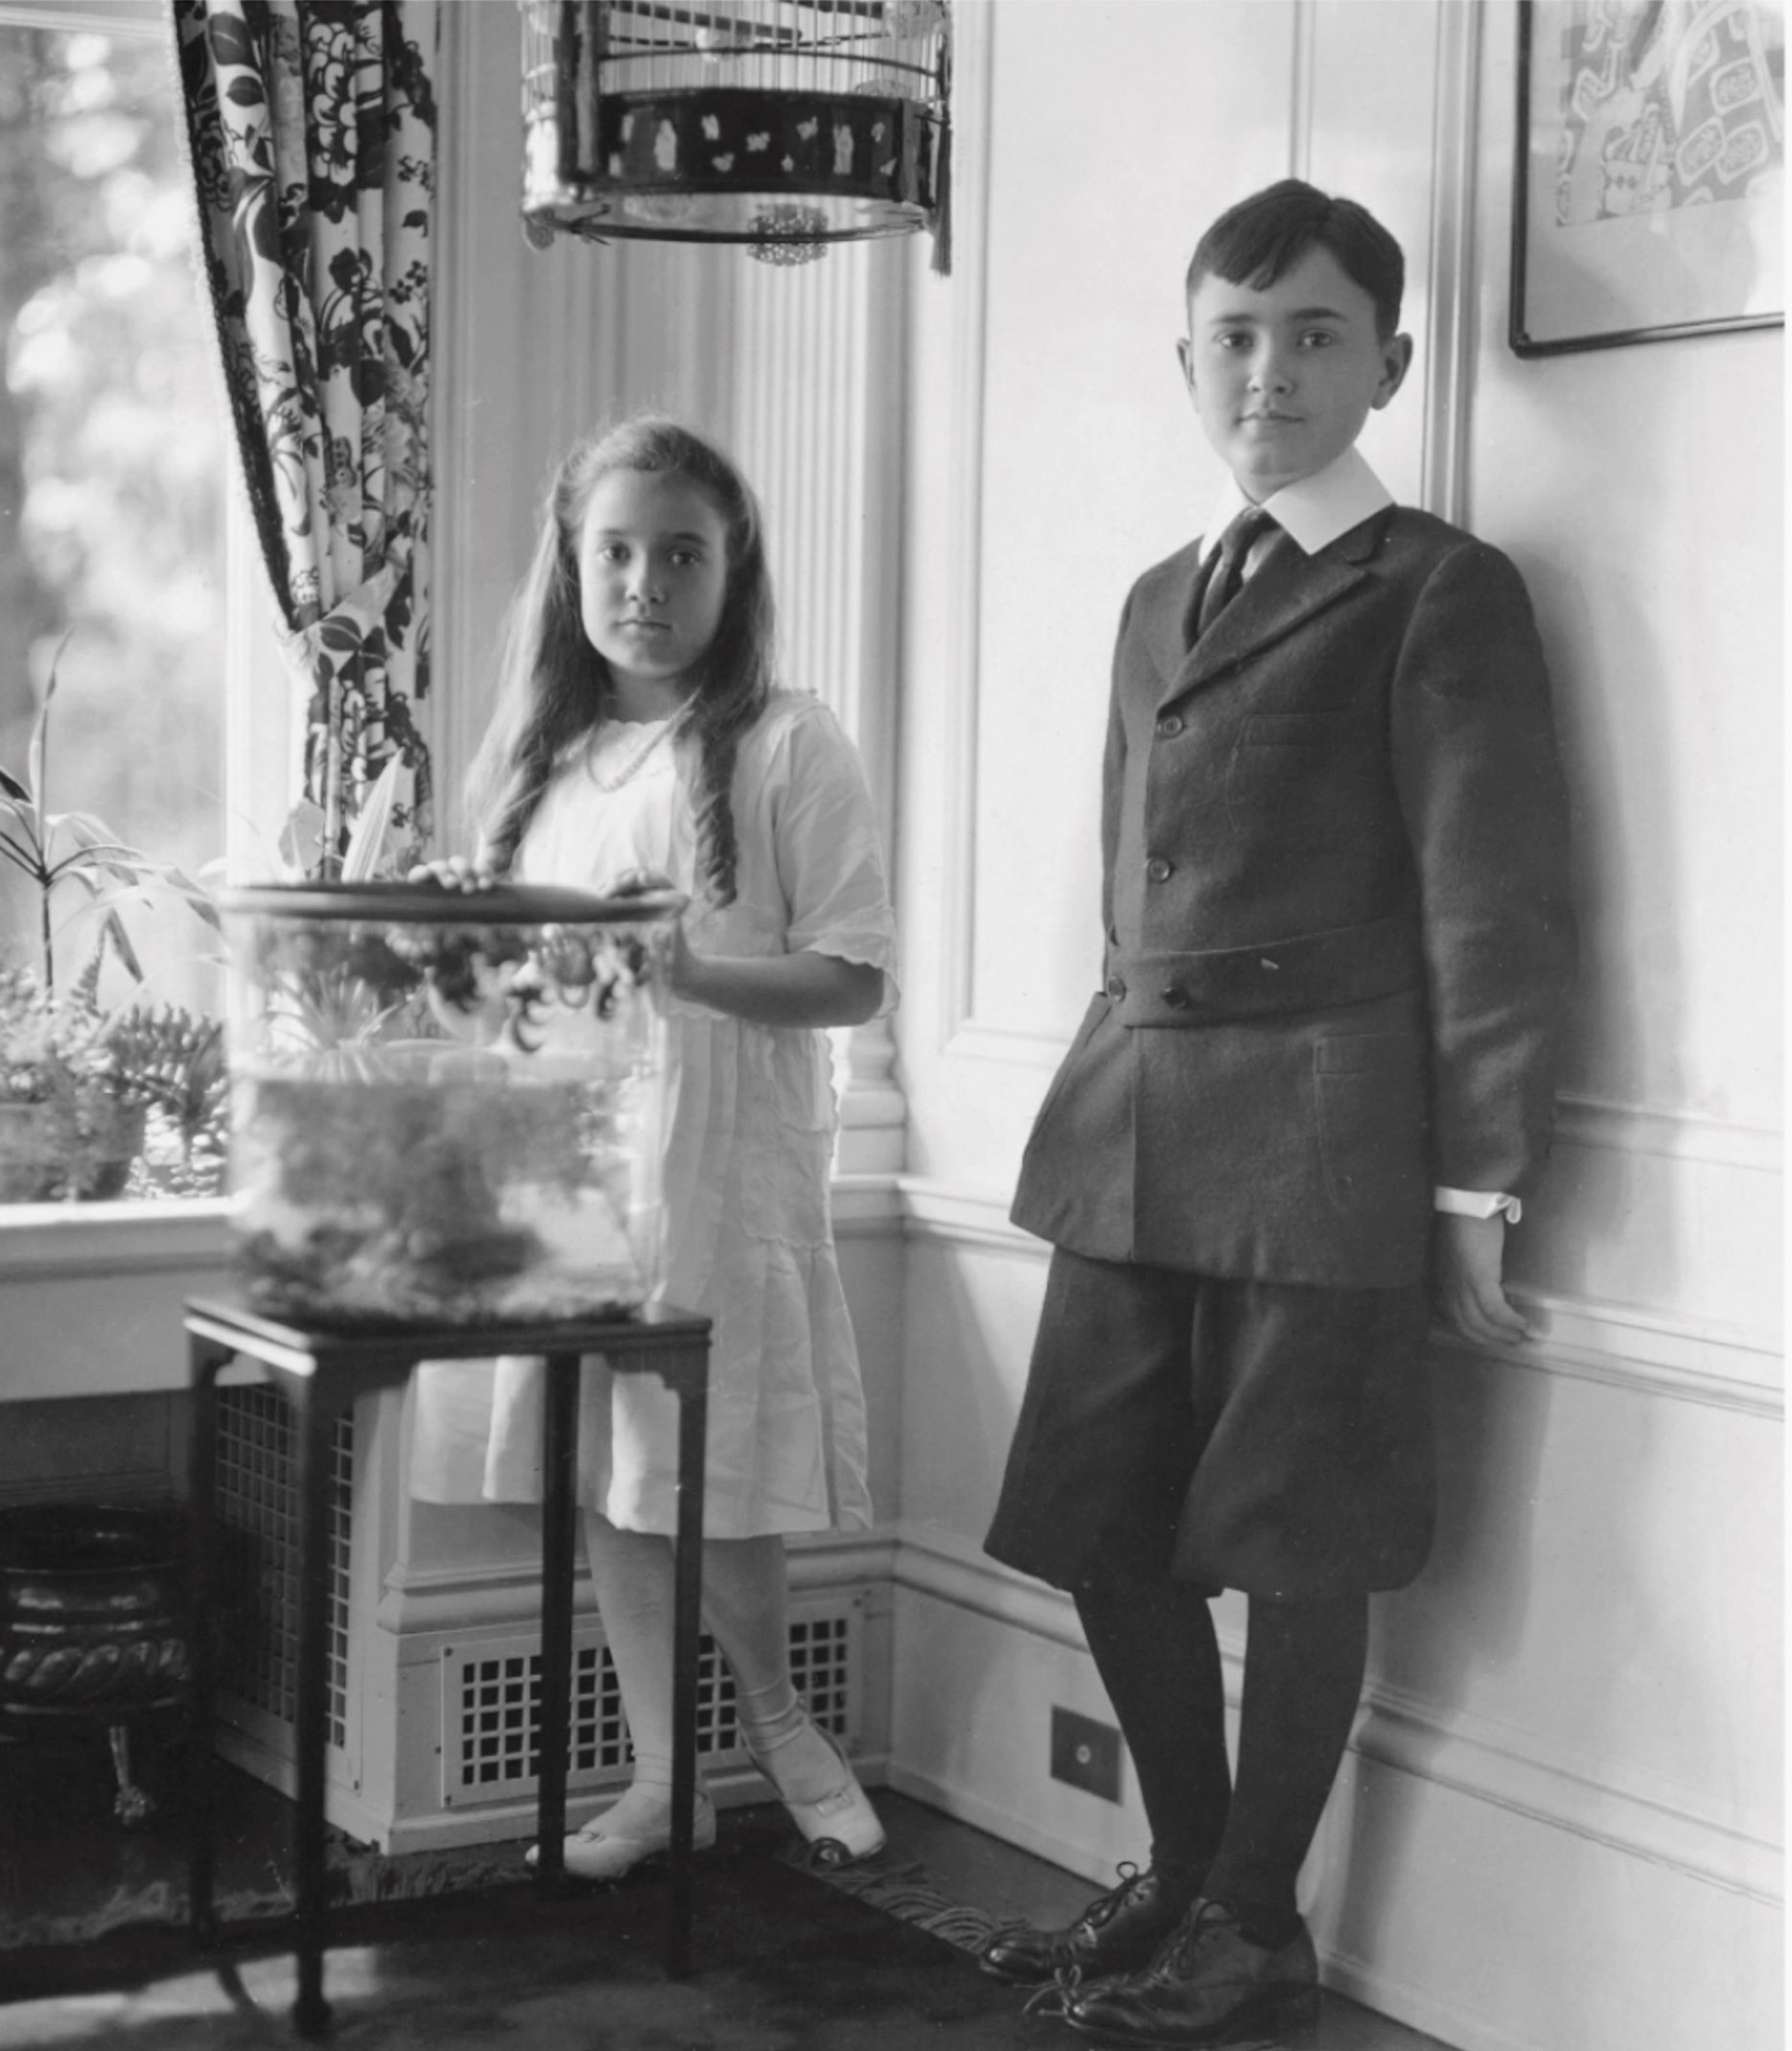 Portrait of Philip and his sister, Theodate, likely in their childhood home, New London, Ohio